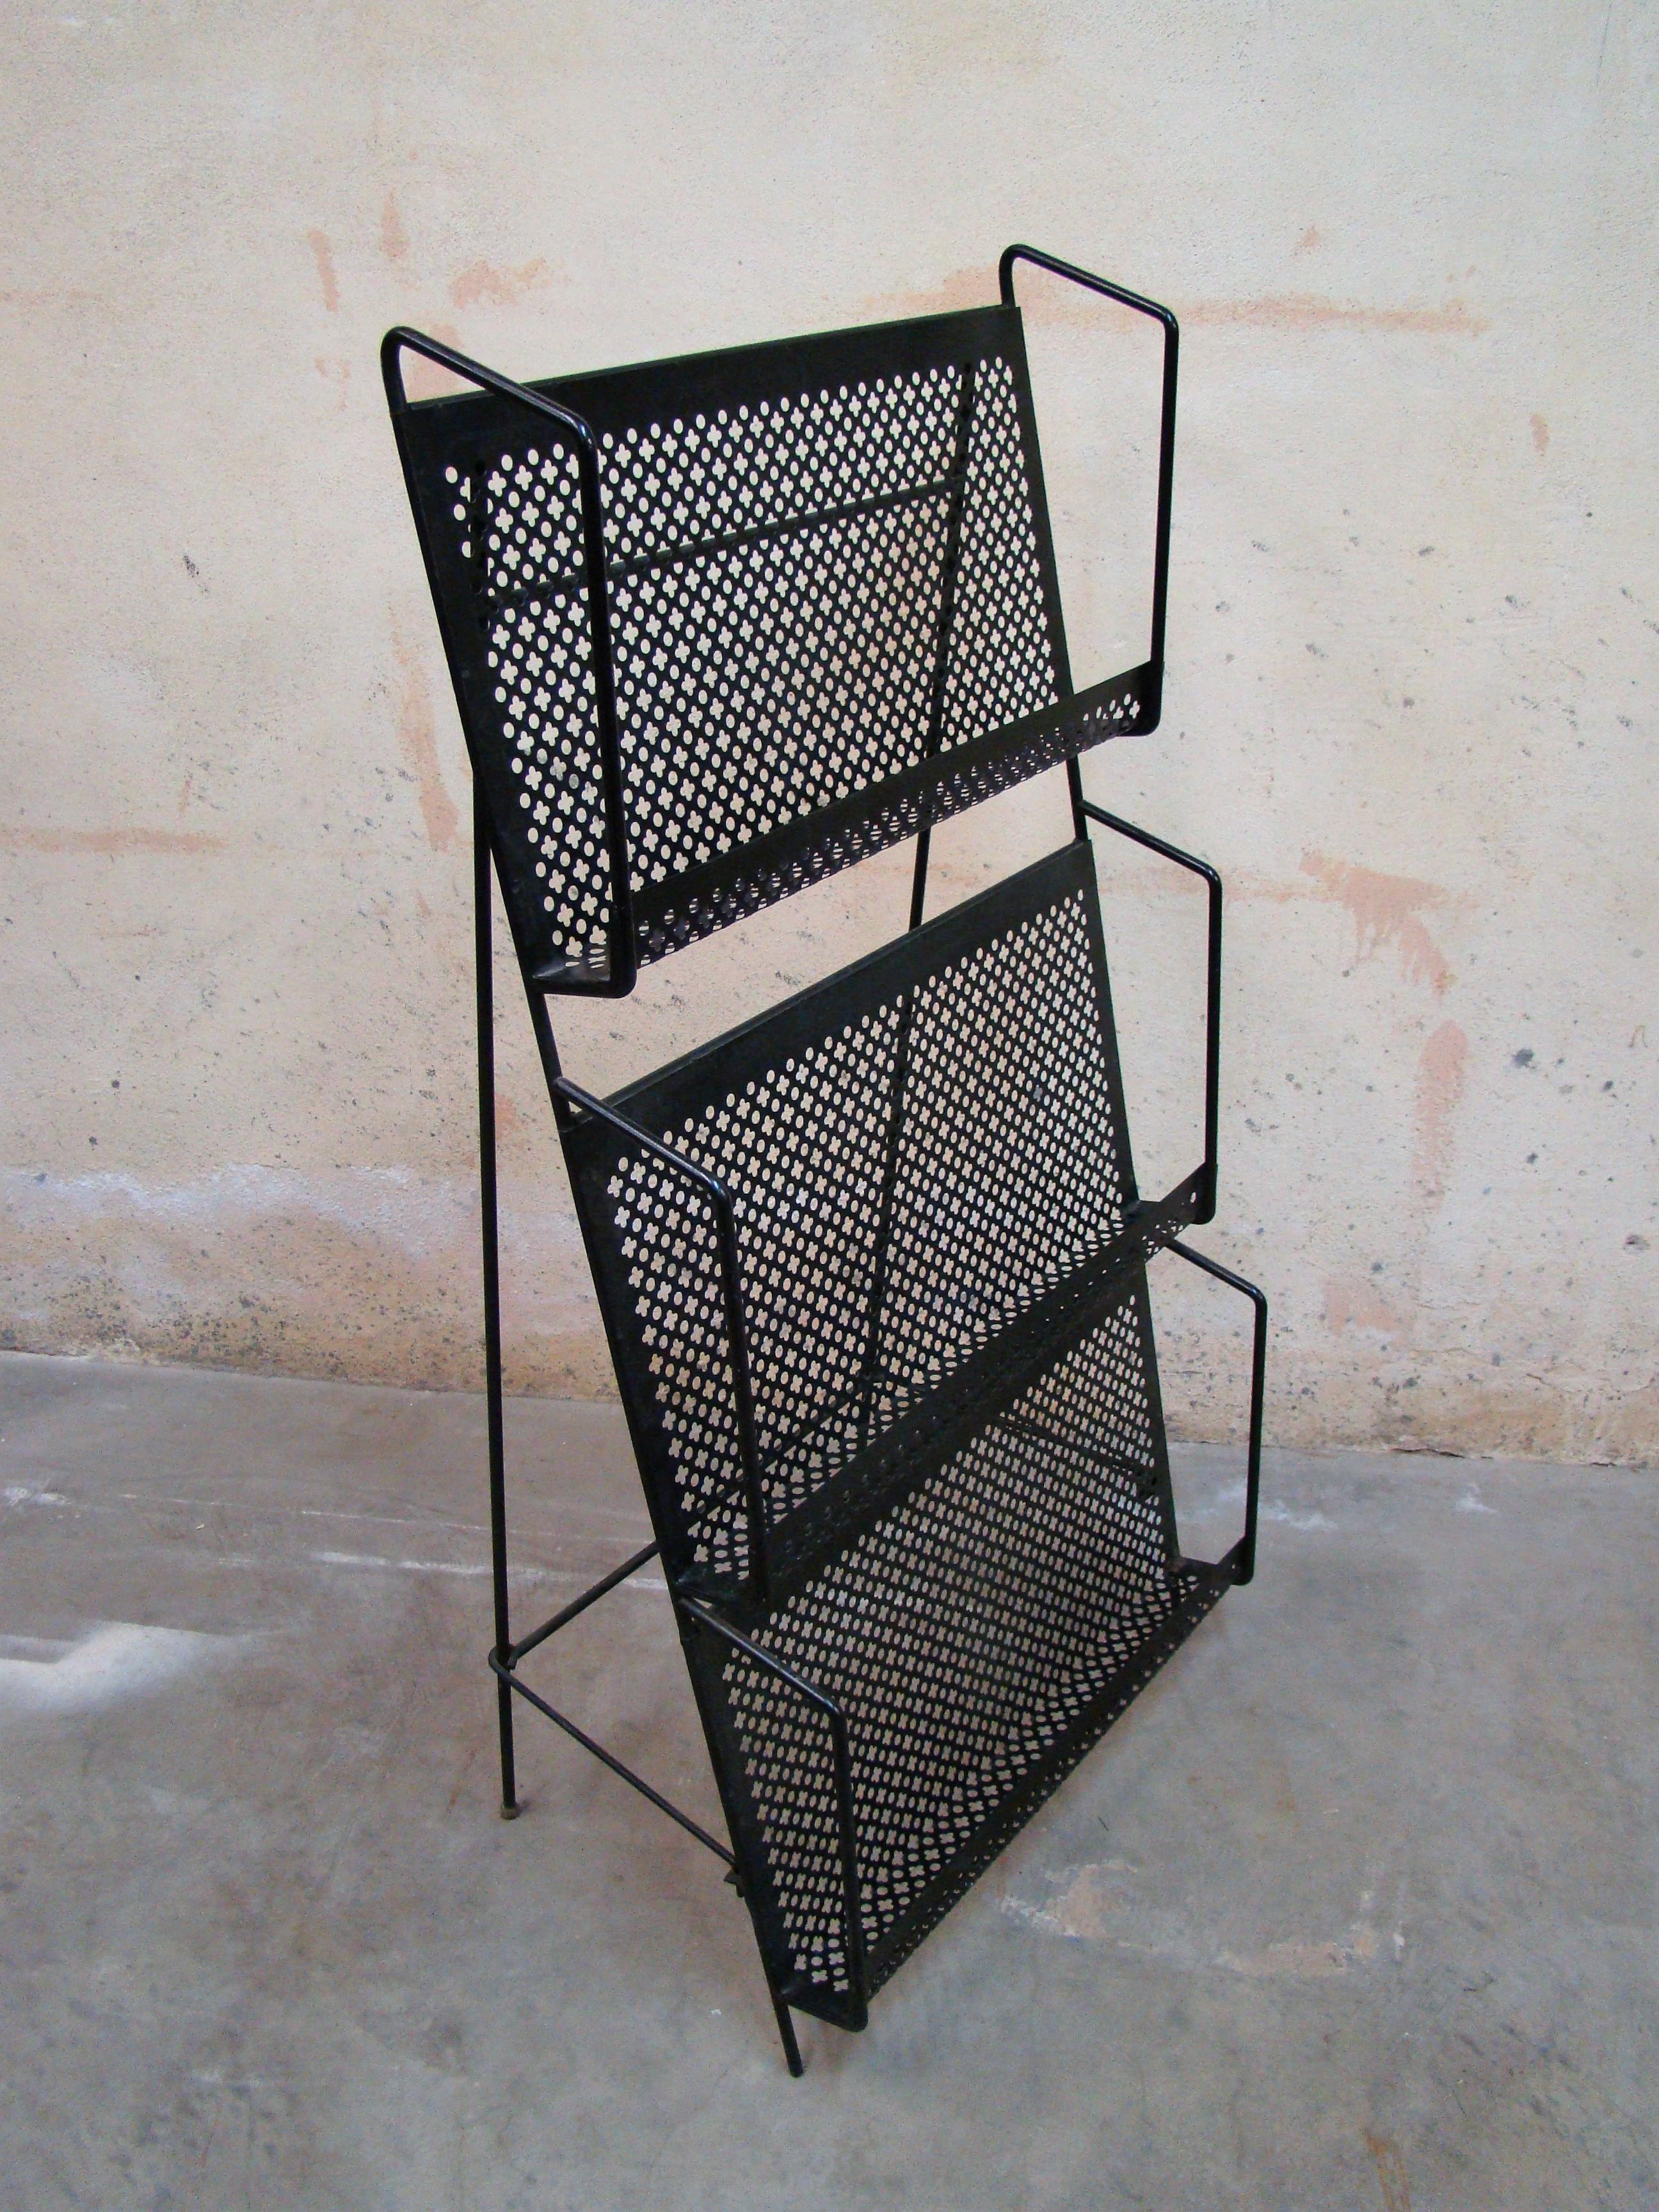 1950's folding magazine display stand constructed from Iron and stamped metal in the 